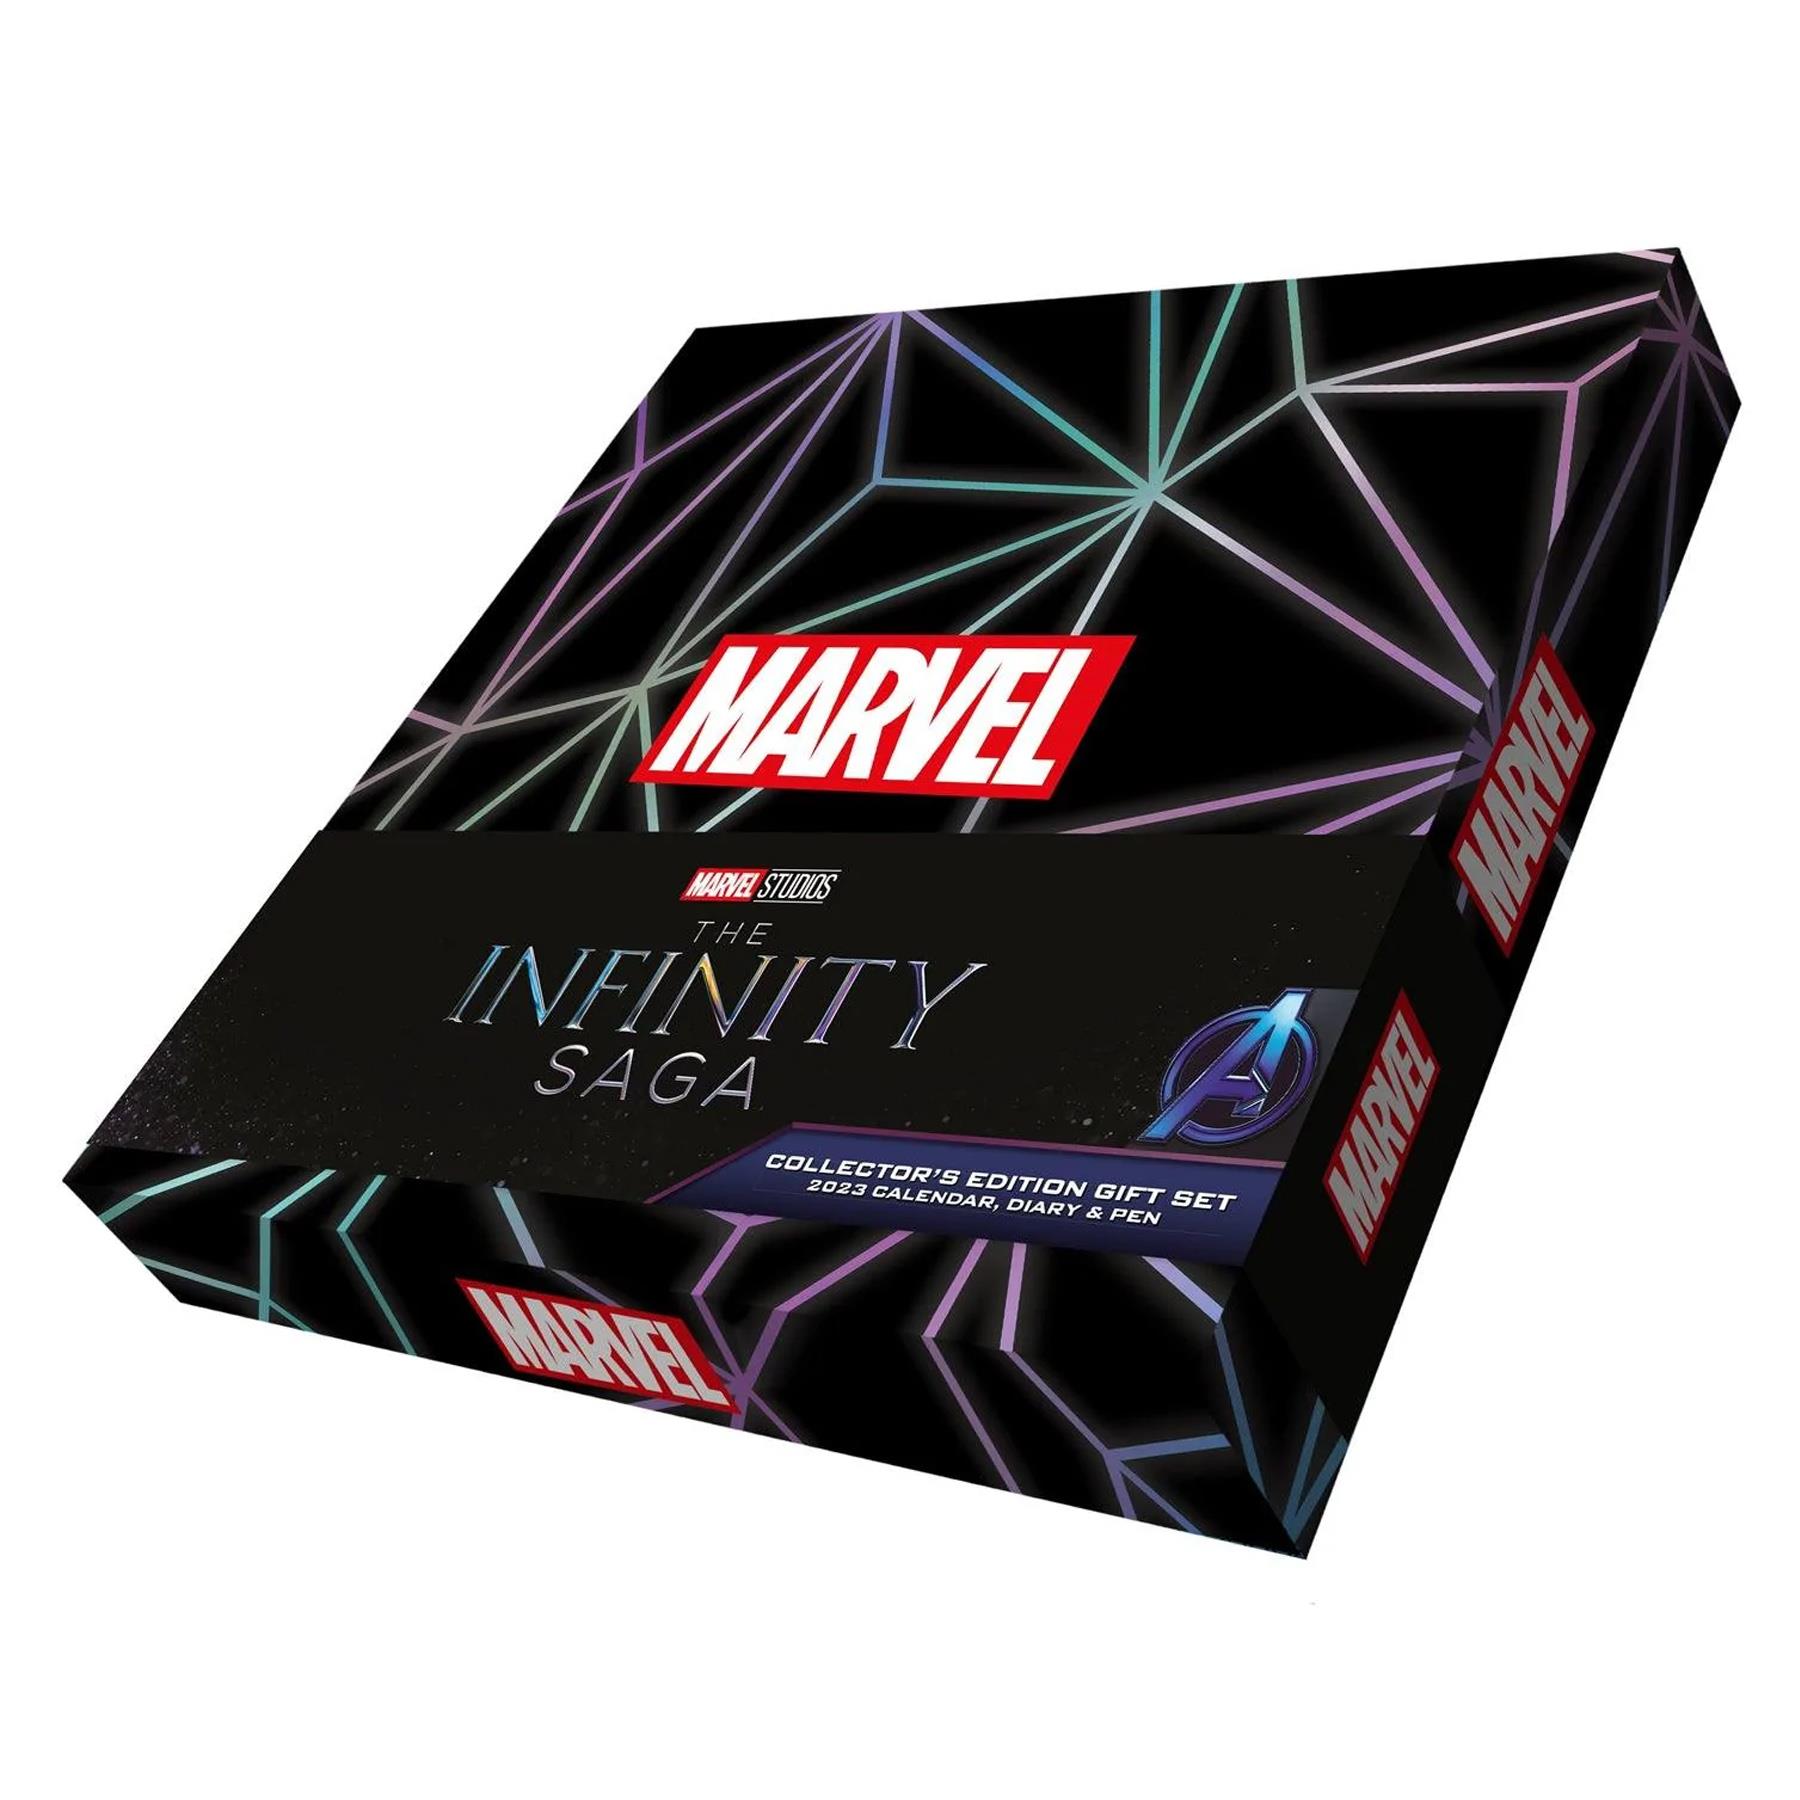 Marvel 2023 Calendar Diary and Pen Official Licensed Gift Box Set